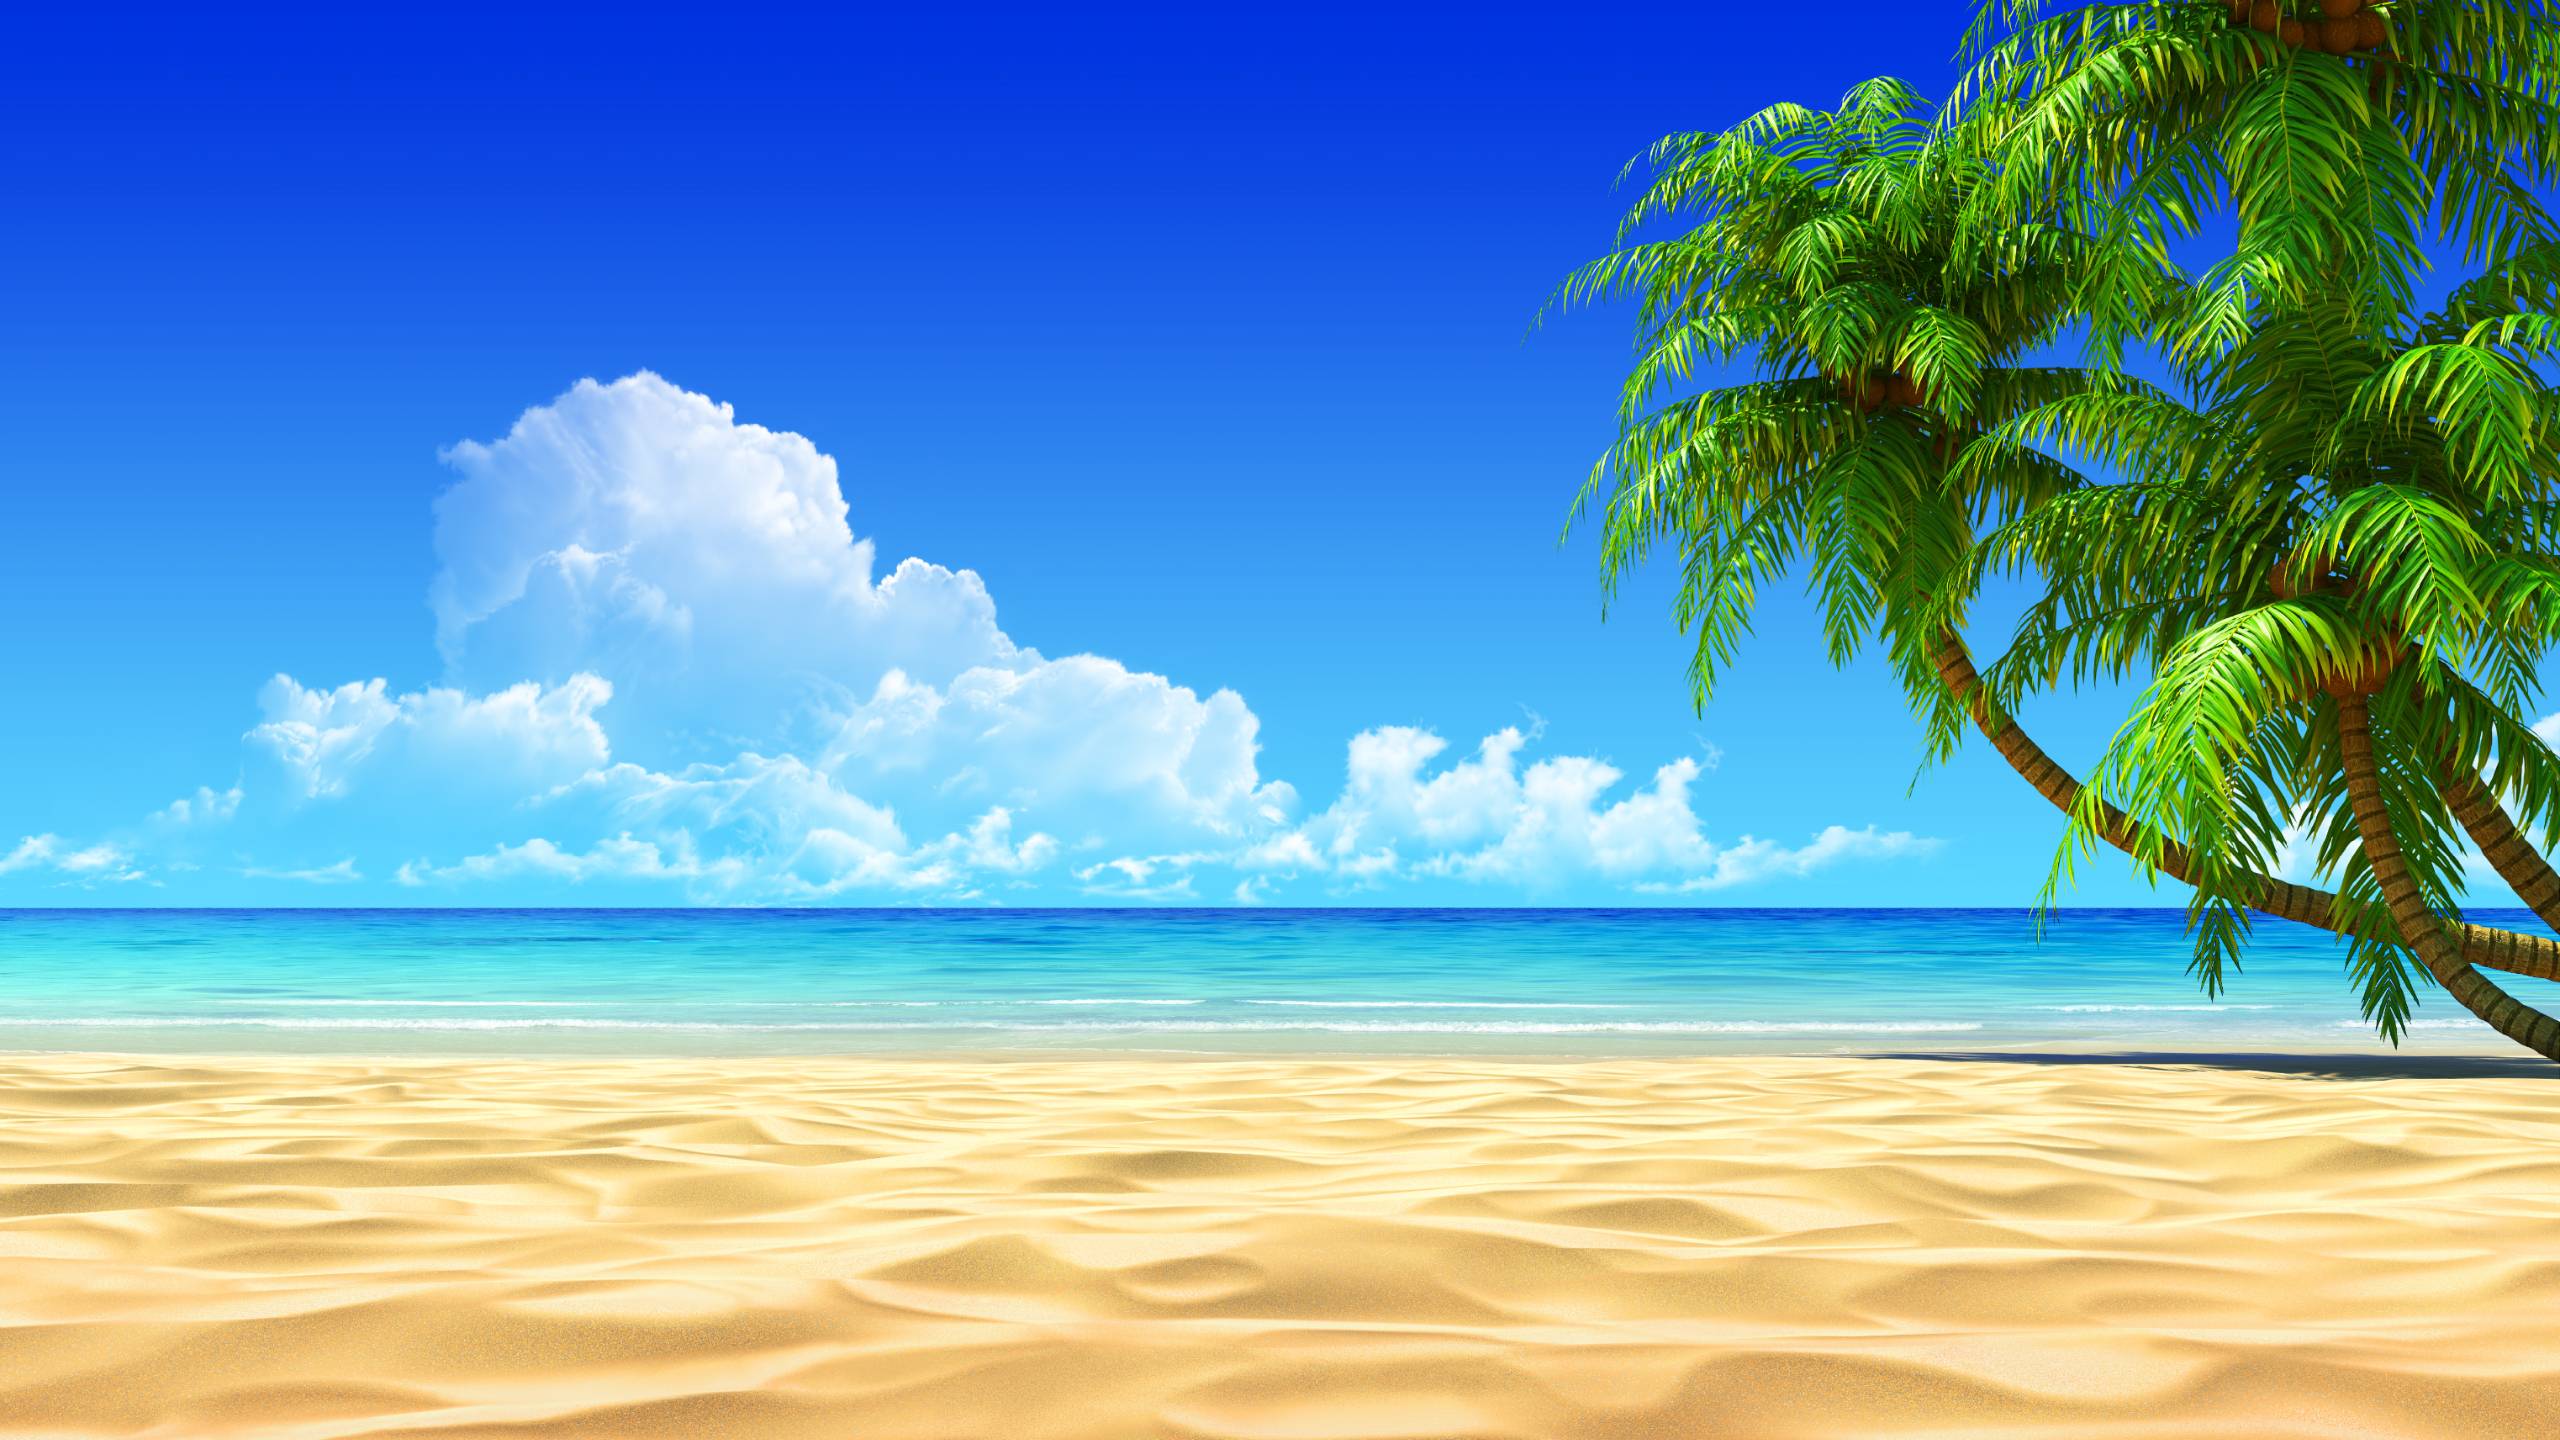 Tropical Beach Picture Wallpaper 152857 High Definition